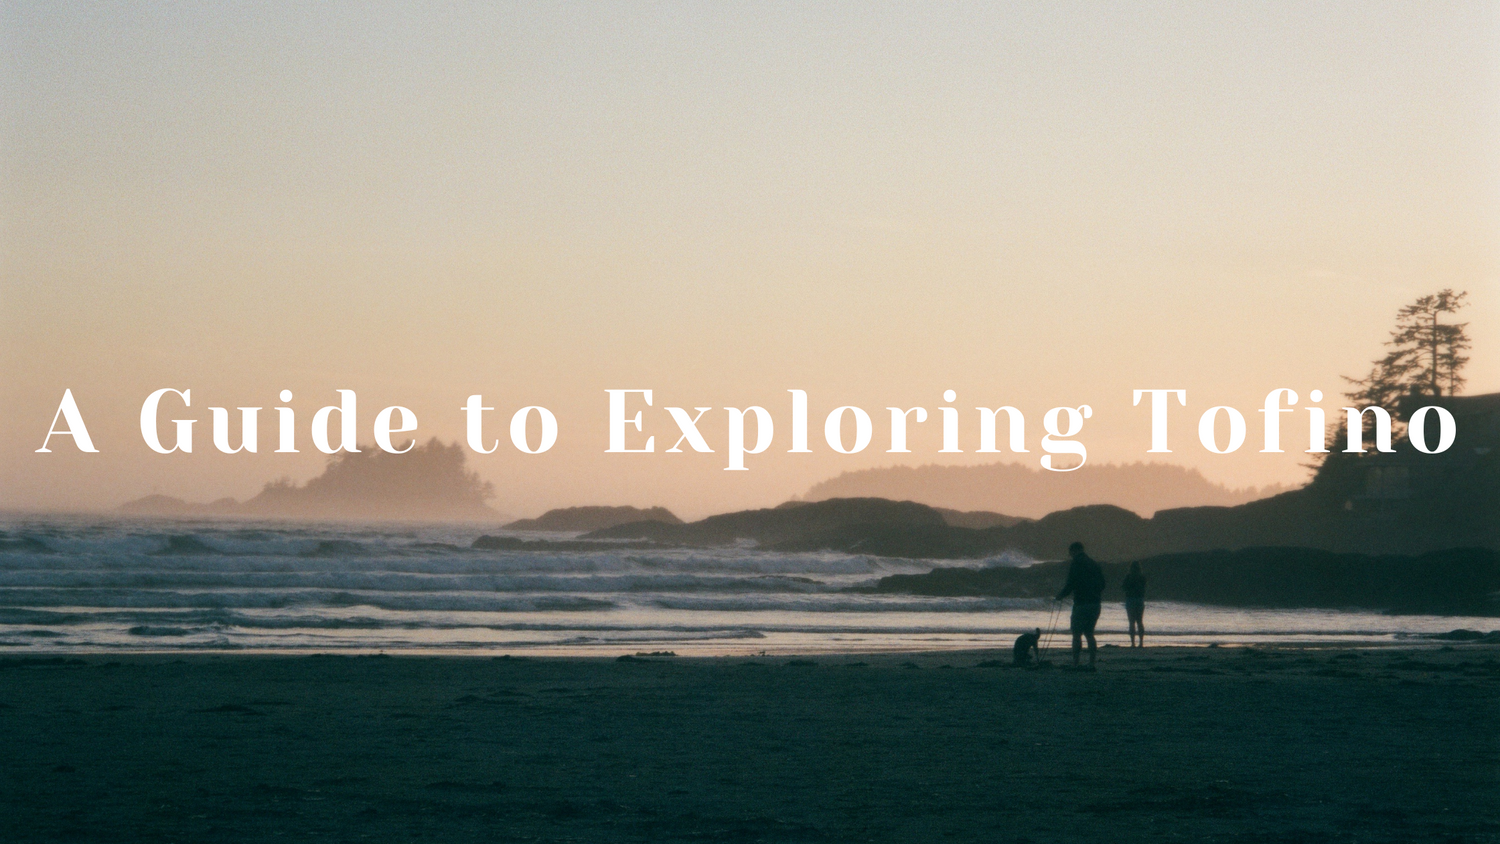 A guide to your time in Tofino, BC